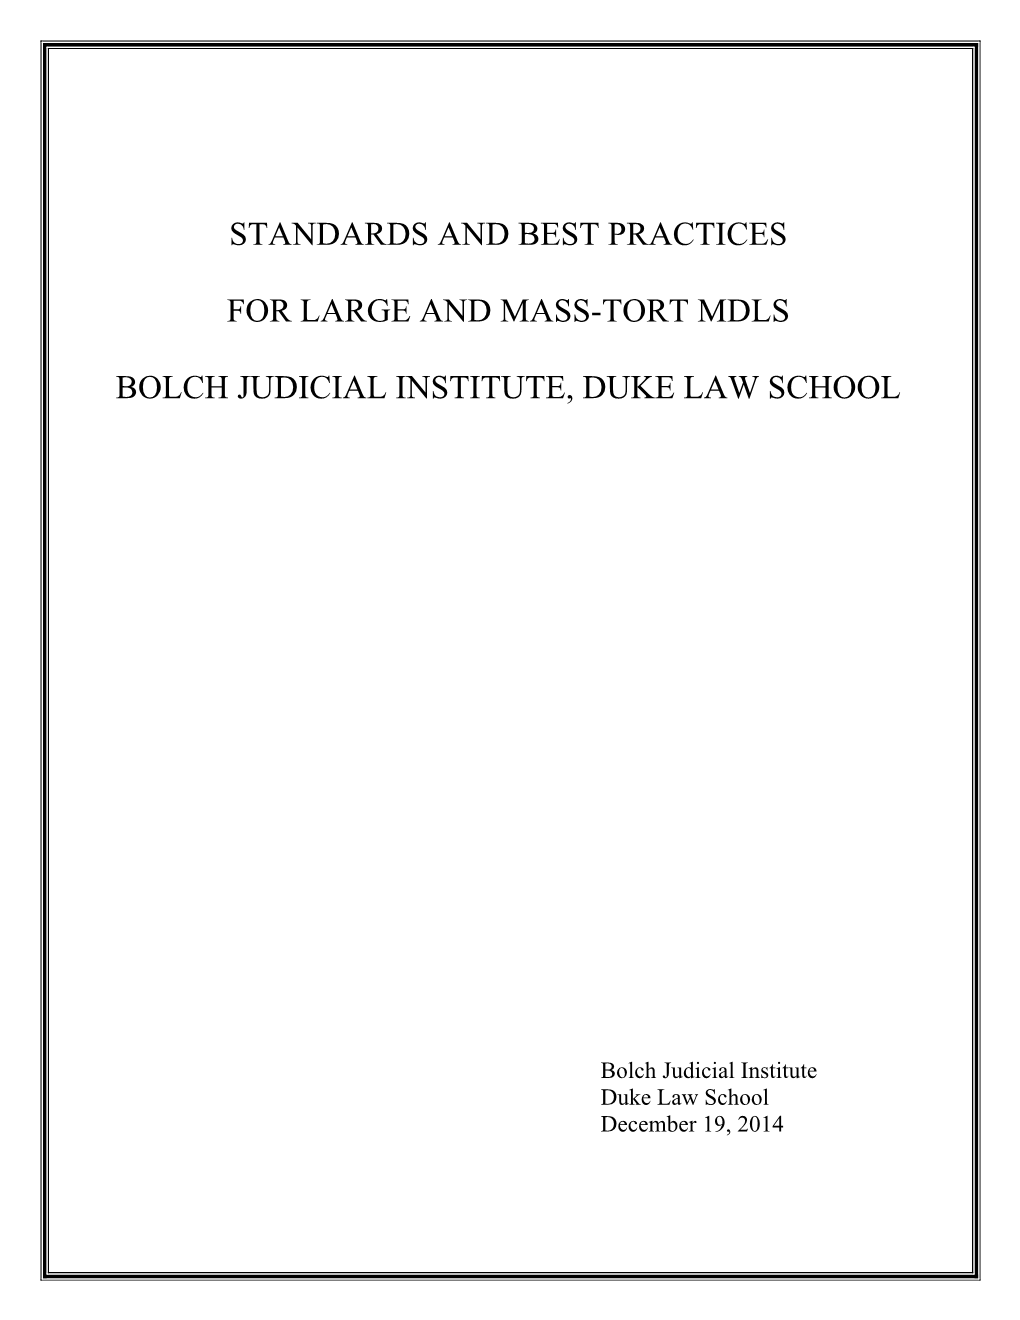 Standards and Best Practices for Large And